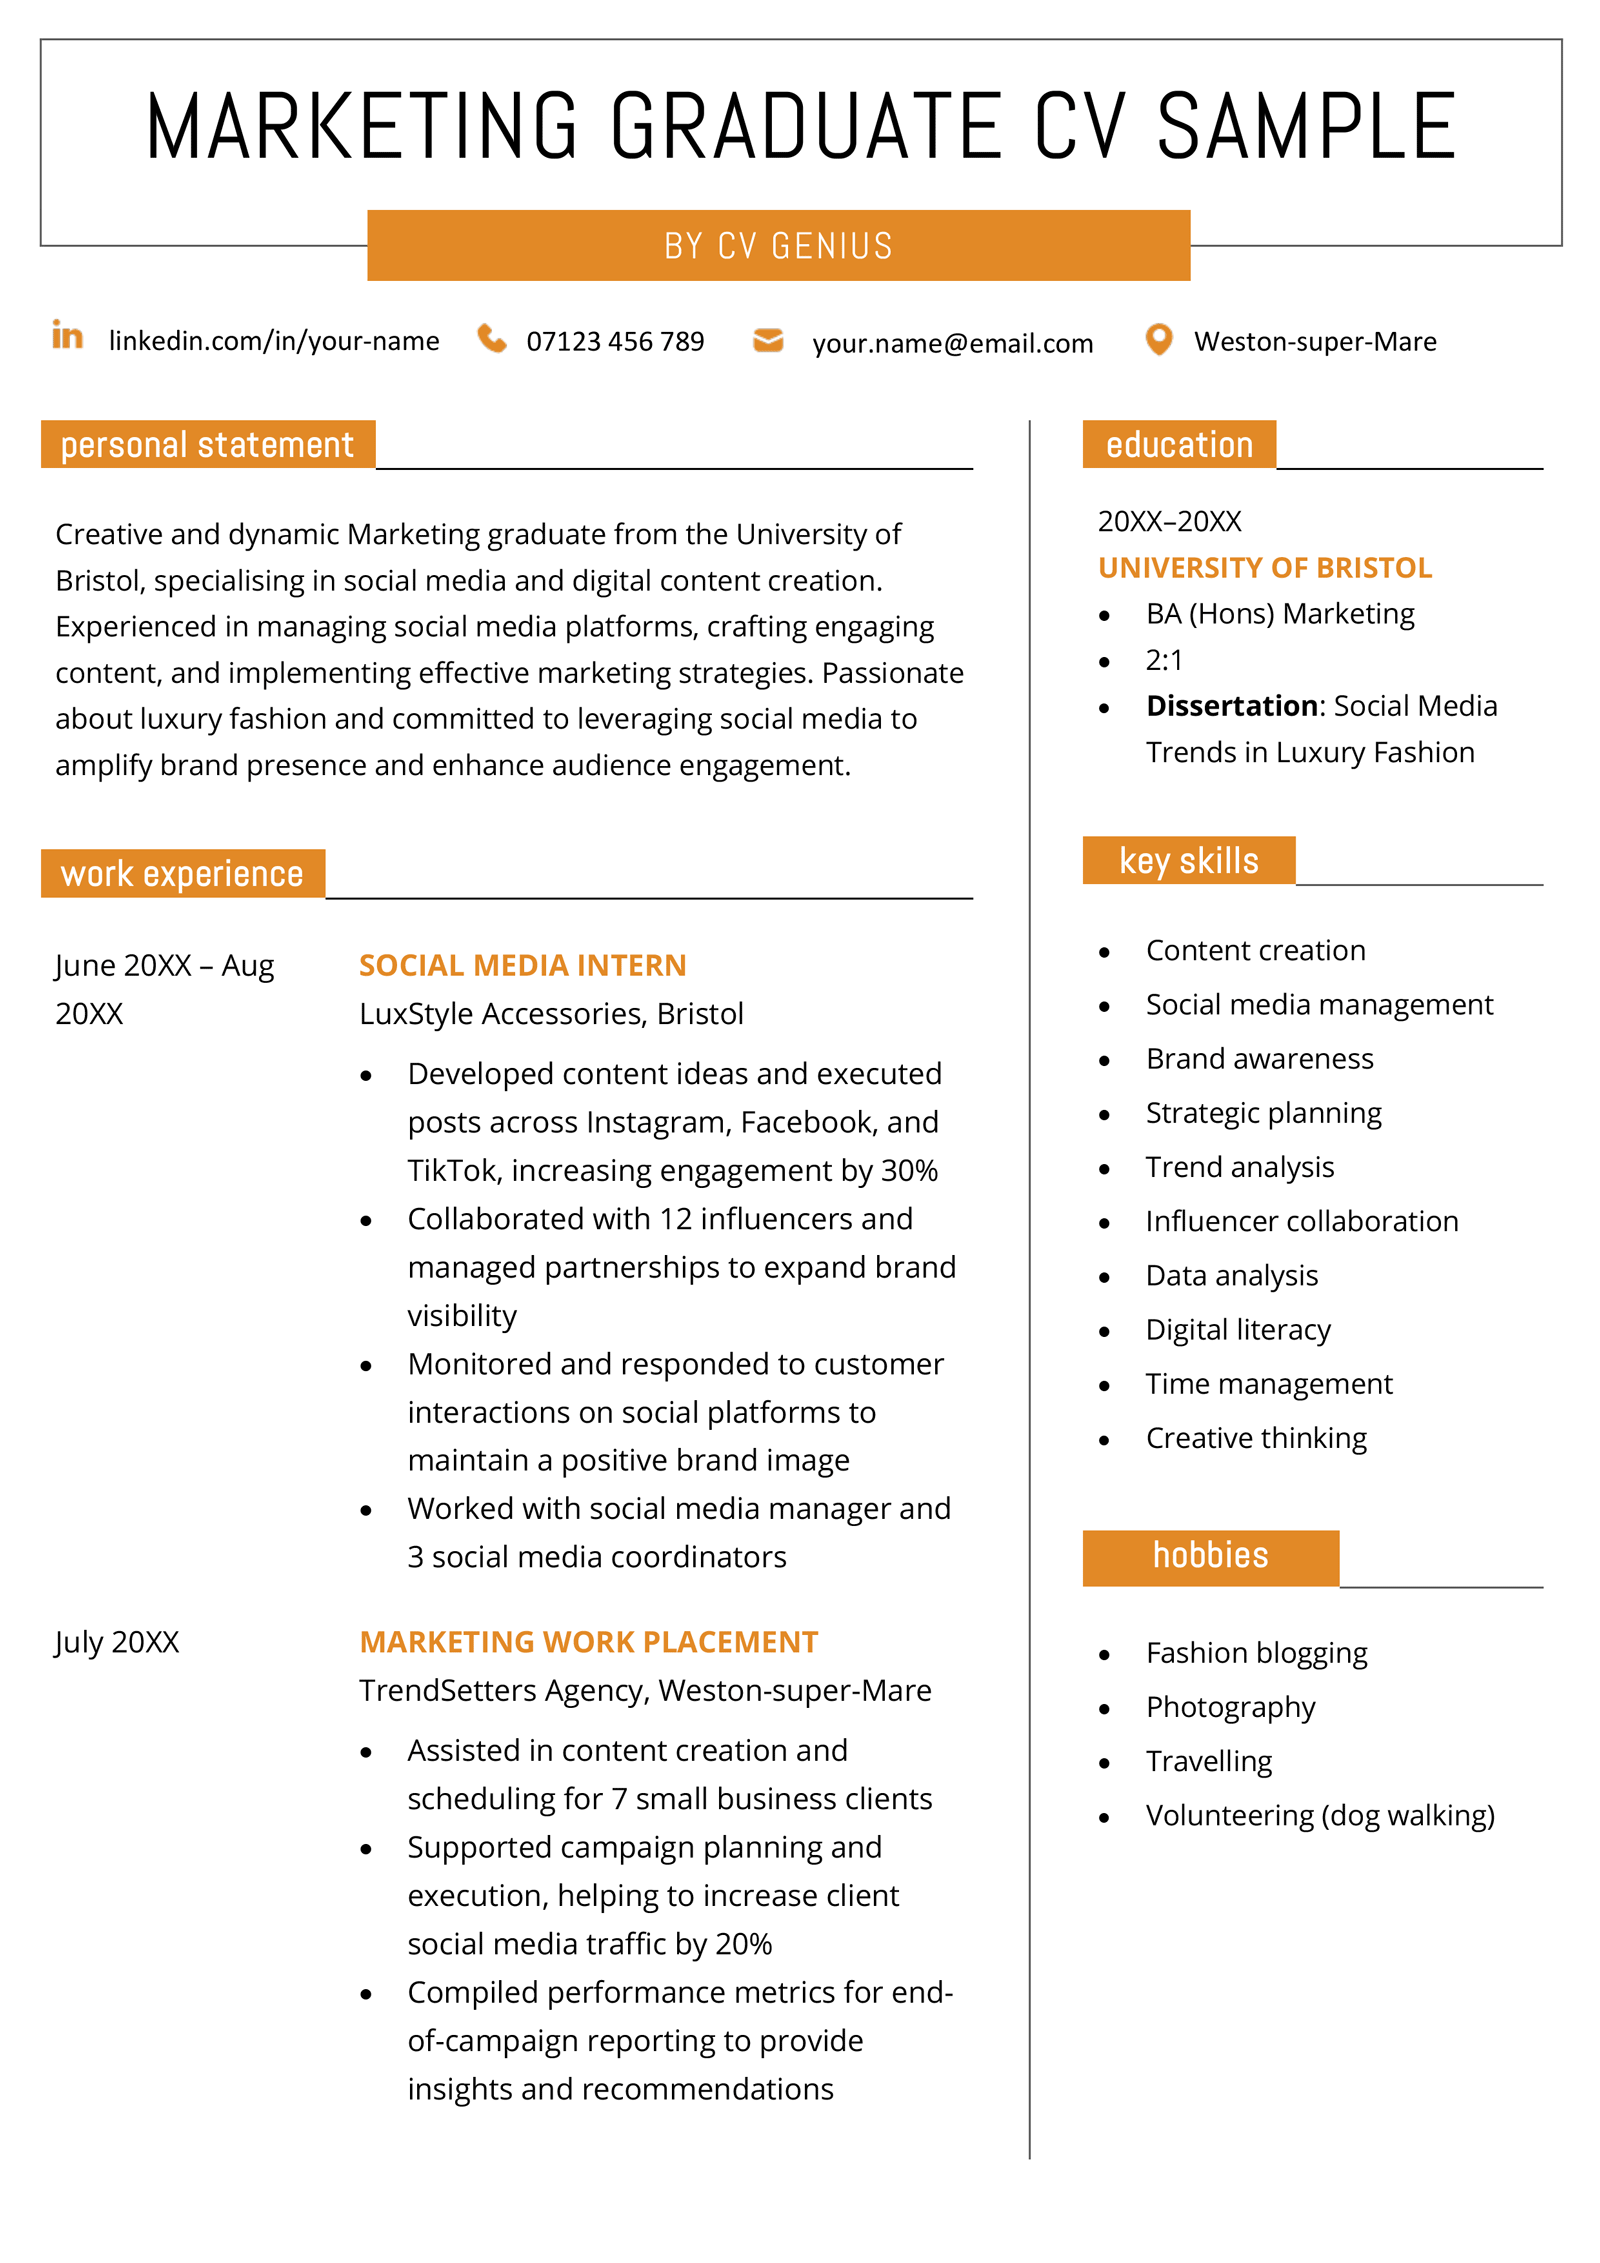 A marketing graduate CV example that uses a bright orange colour scheme to fit in with the modern nature of the marketing industry.